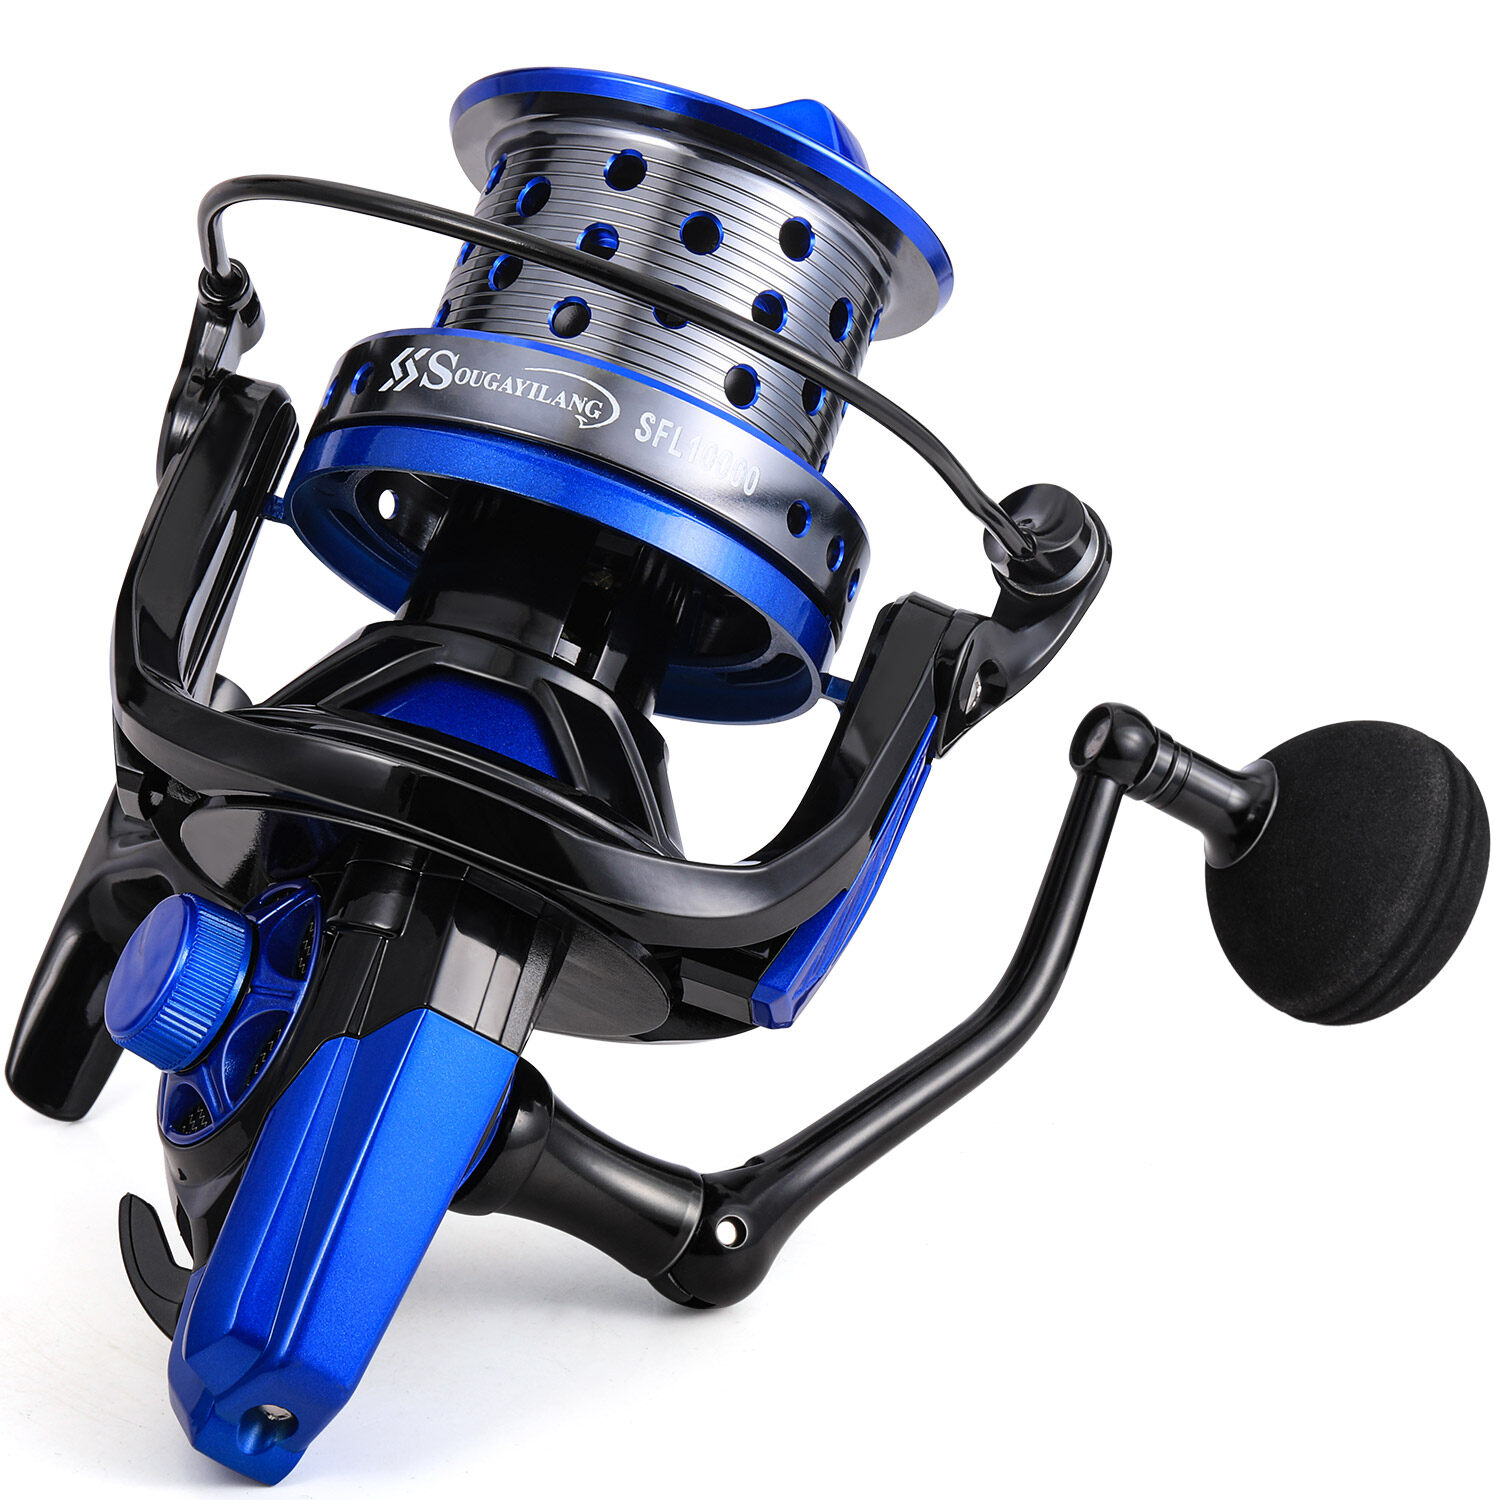 Sougayilang 1pc 10000 Series 4.7:1 Gear Ratio Spinning Reel, 11+1BB Metal  Fishing Reel With Max Drag 25kg/55lbs, Fishing Tackle For Advanced Anglers